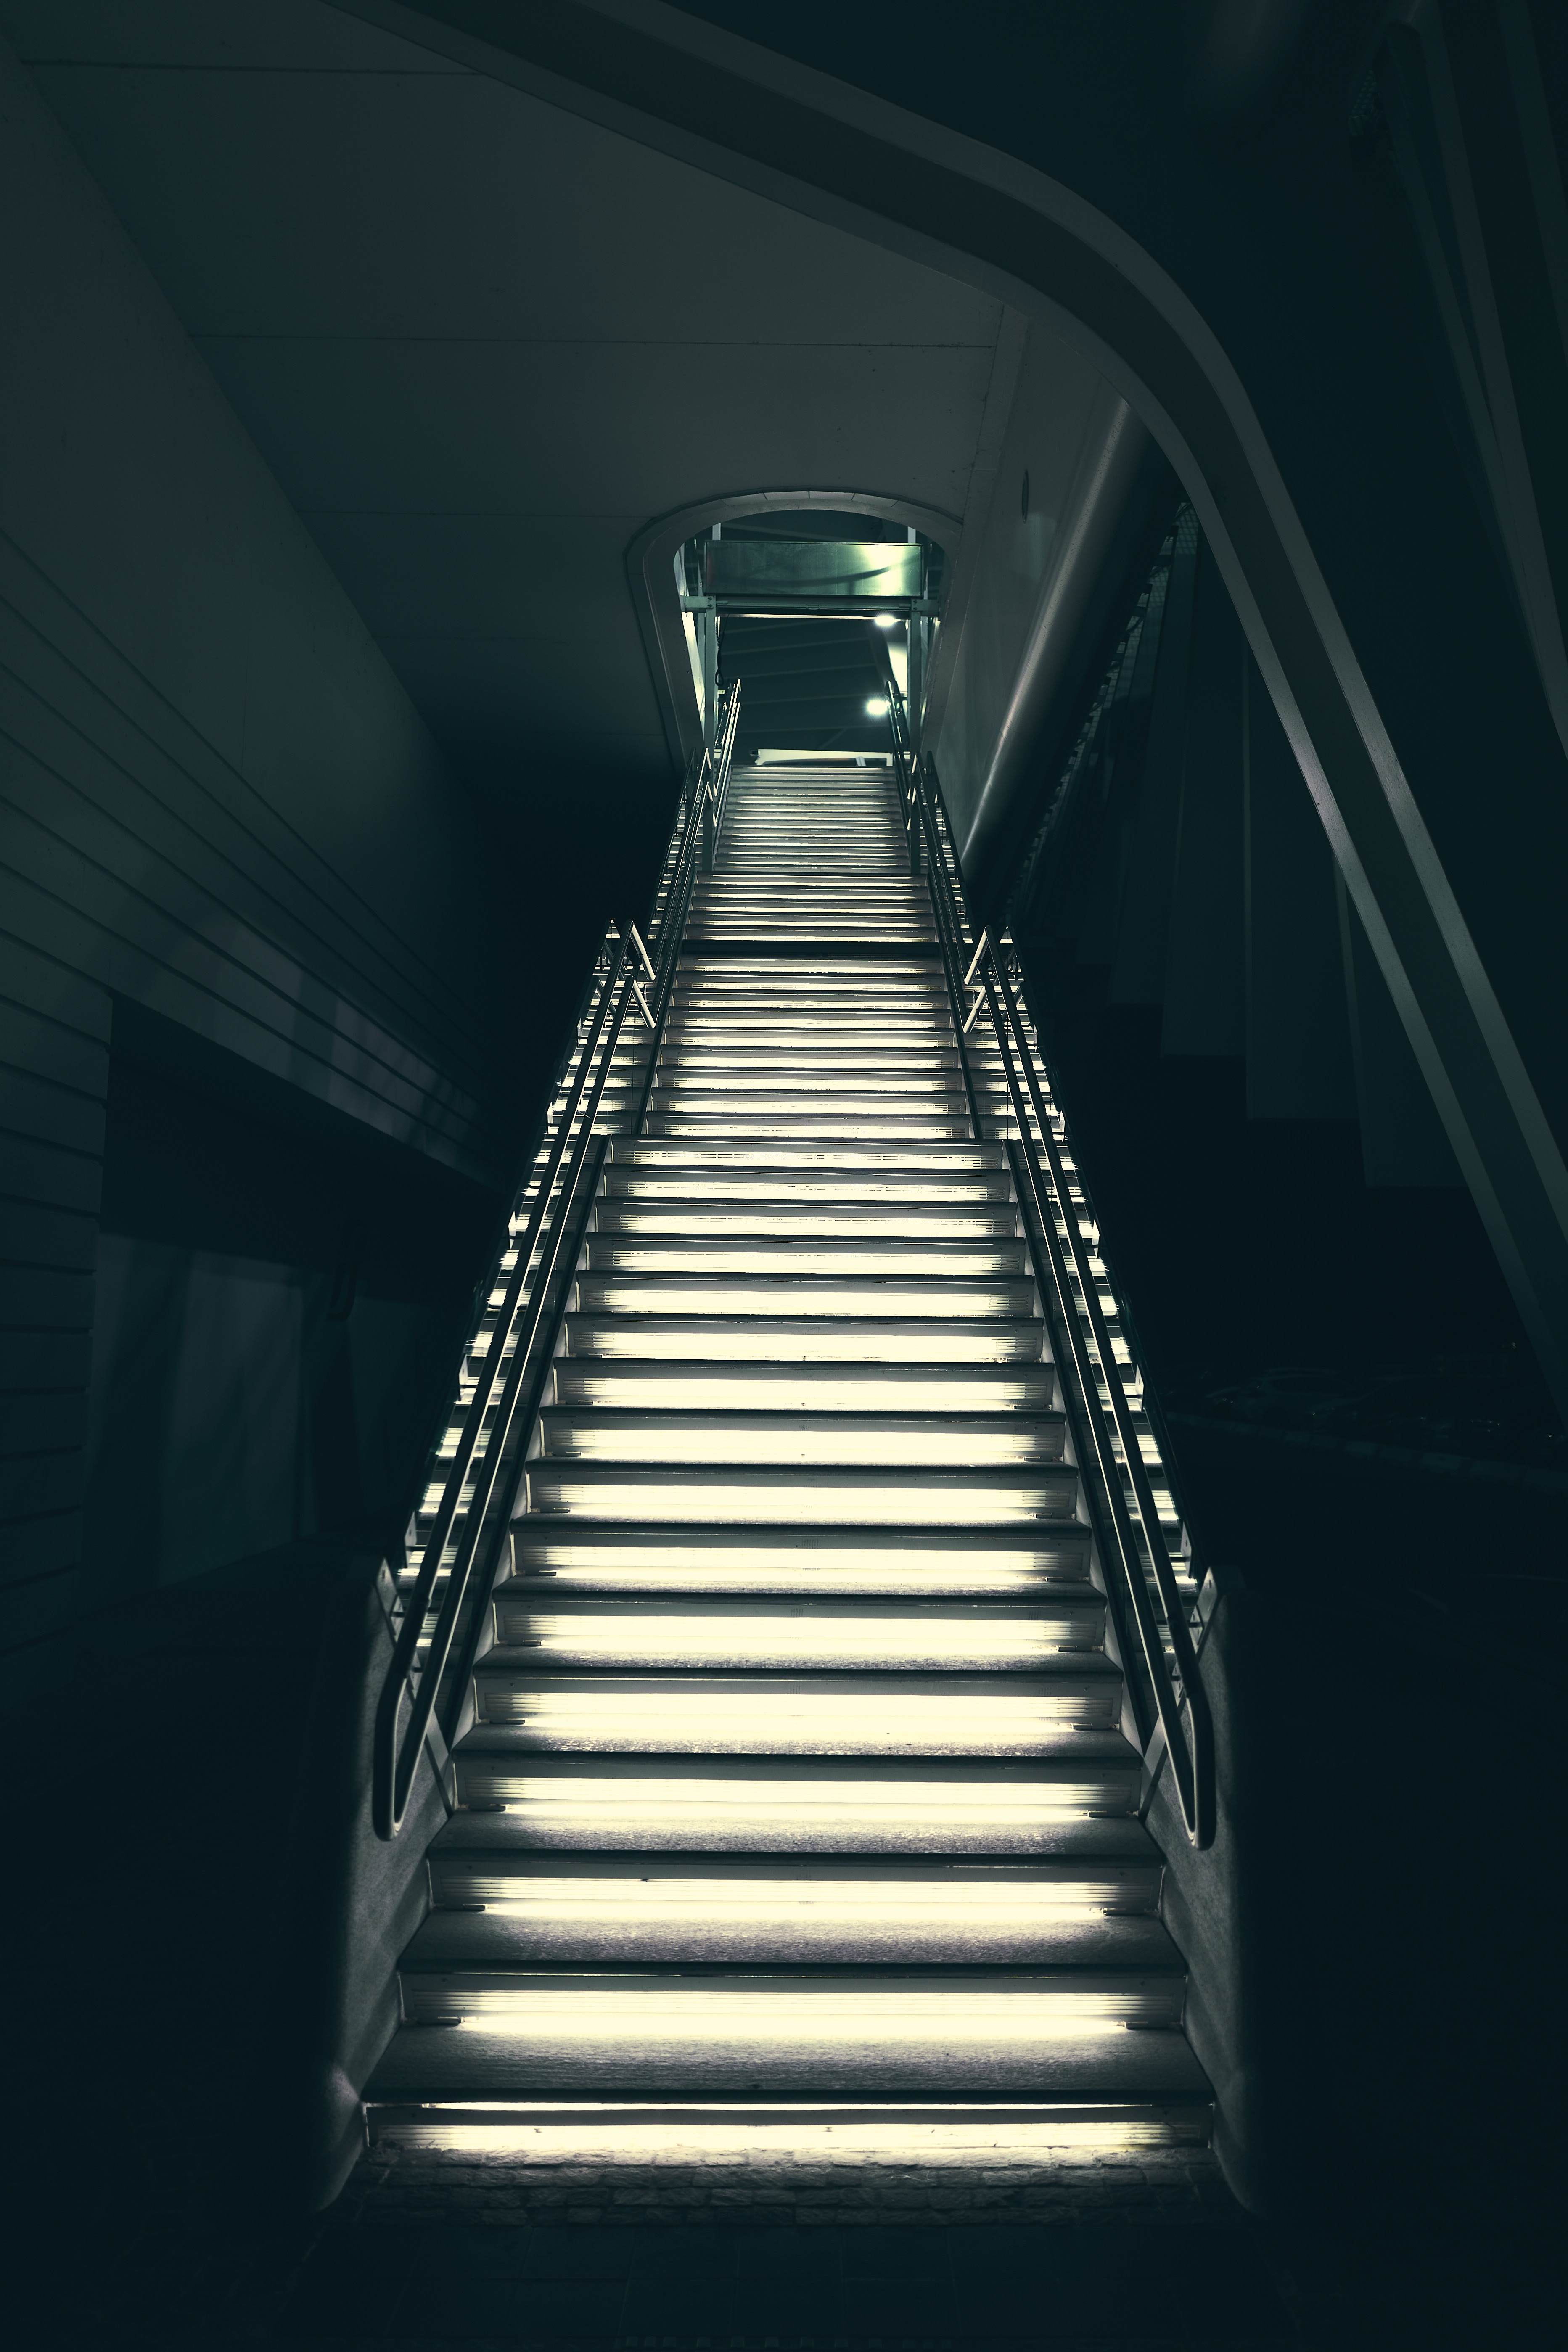 Full HD Wallpaper backlight, miscellanea, miscellaneous, illumination, stairs, ladder, output, exit